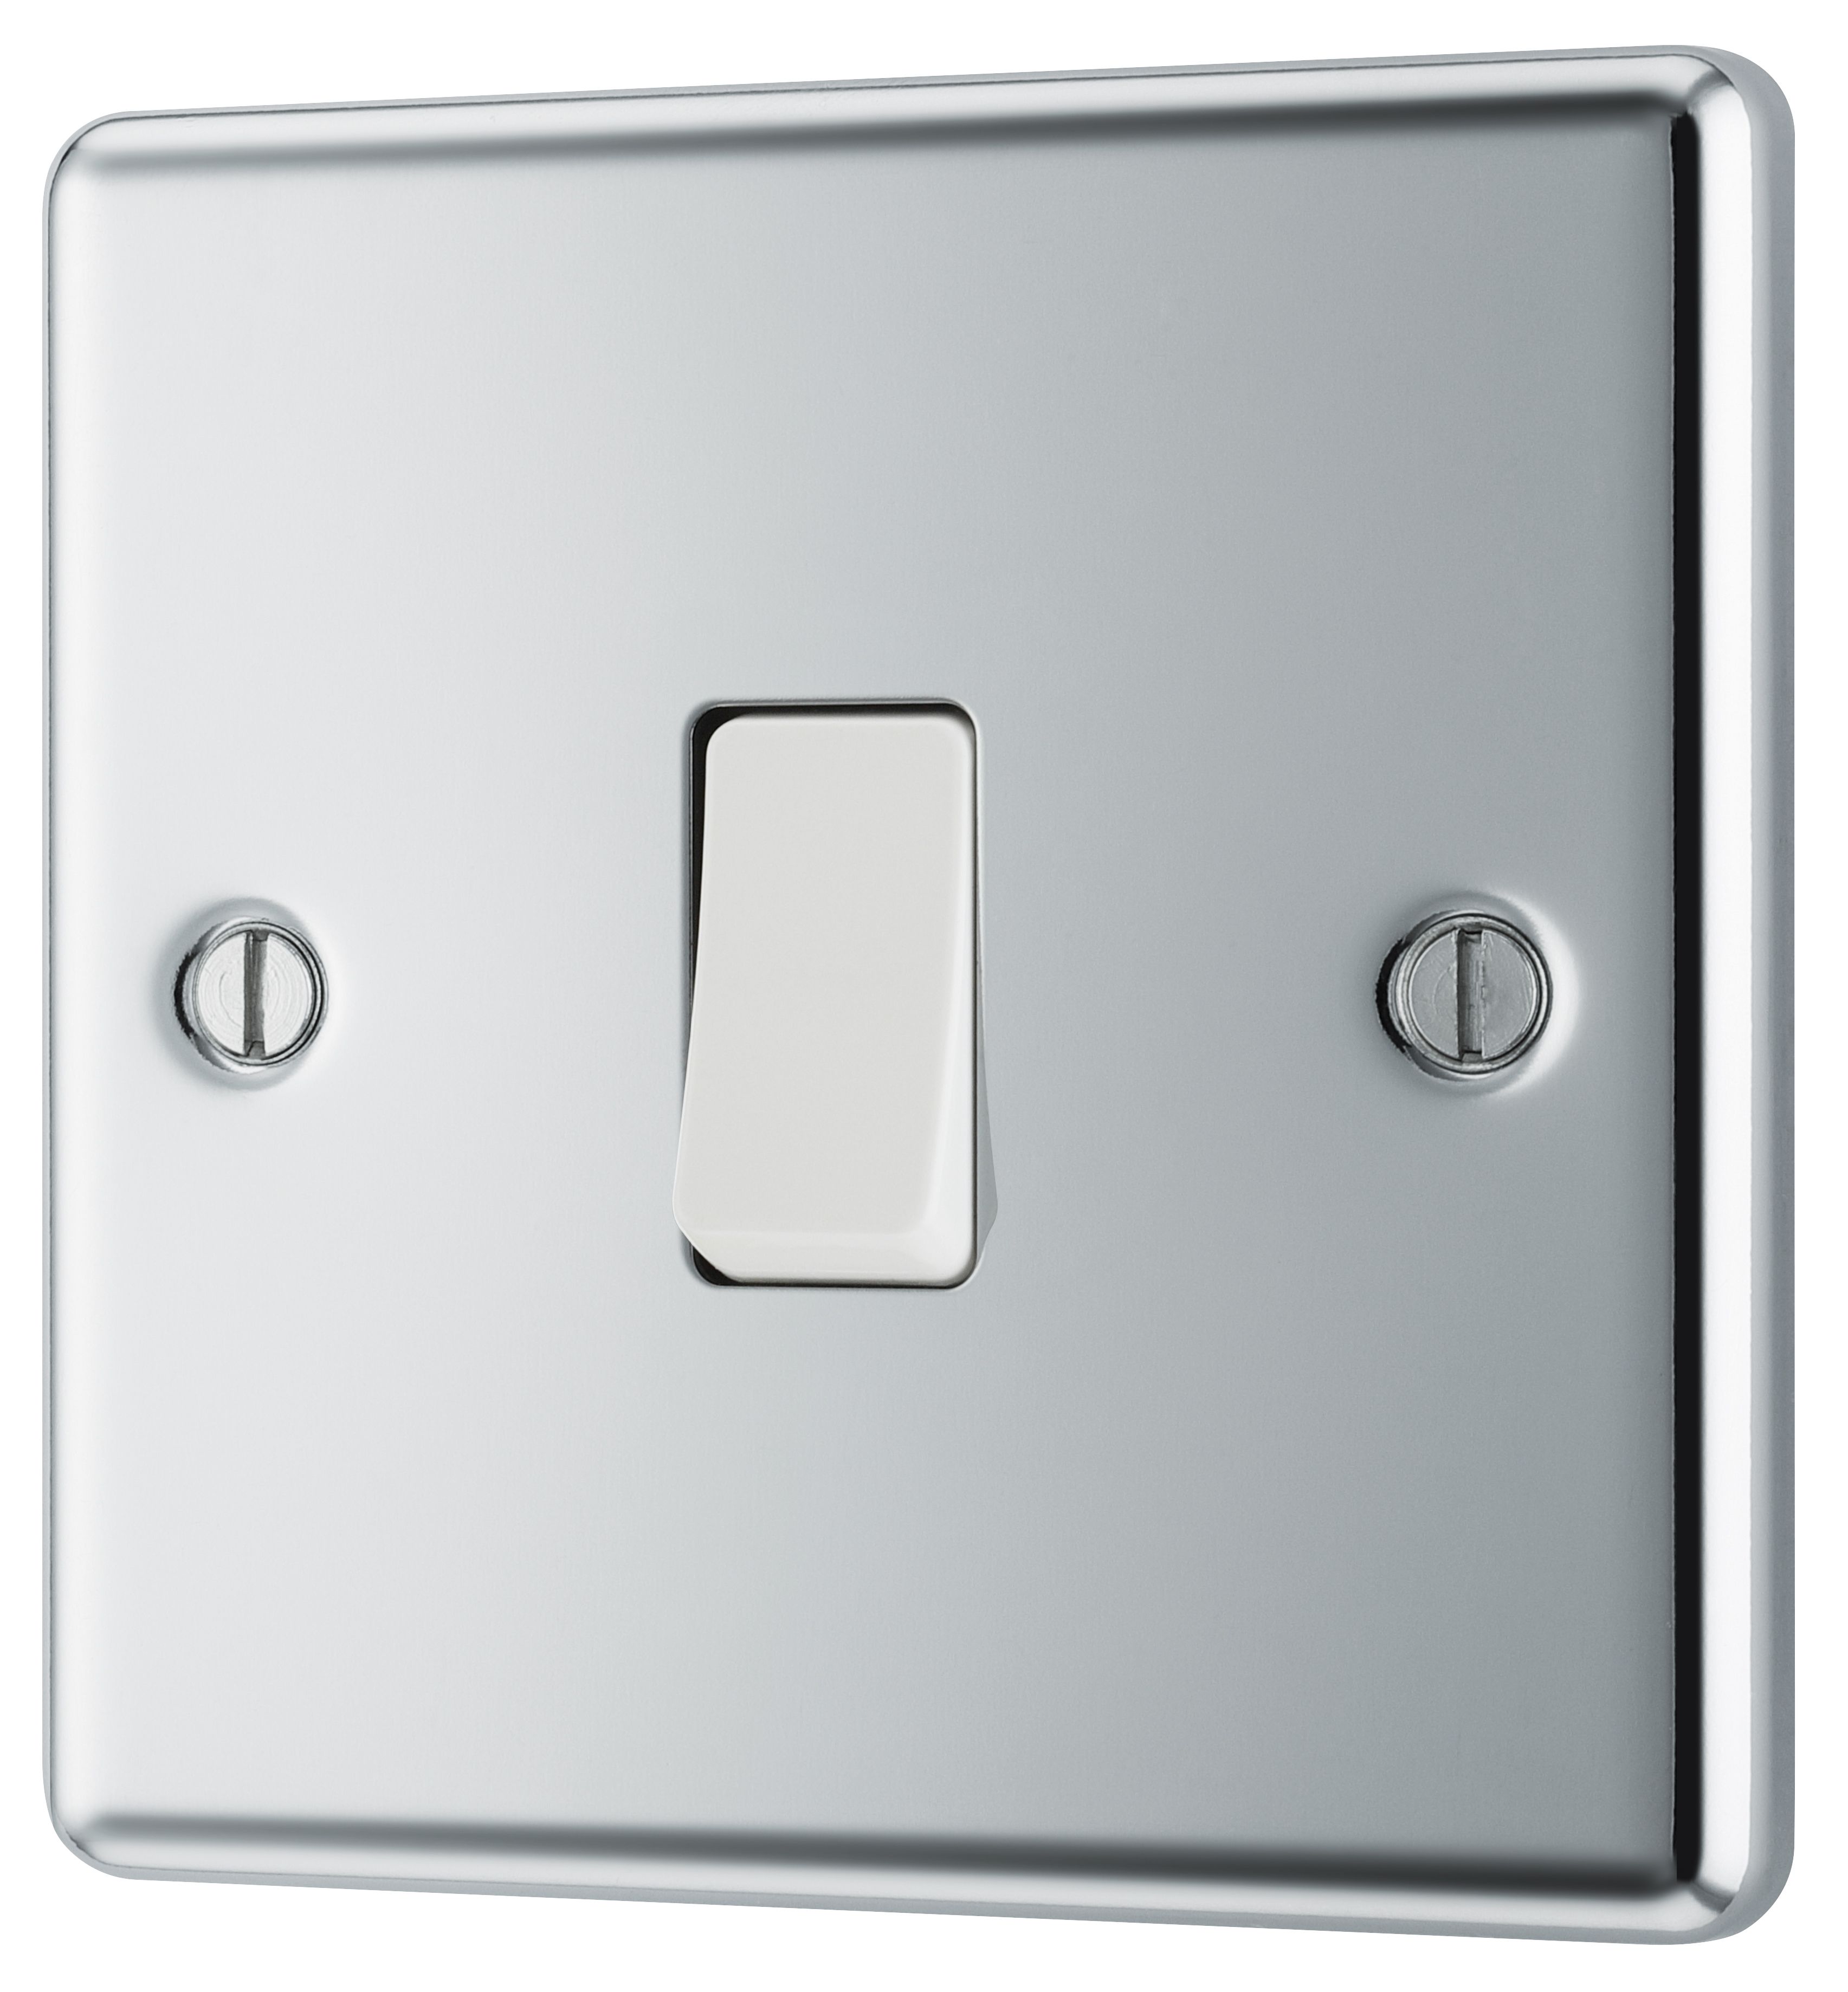 GoodHome 20A Single 2 way Raised rounded Screwed Intermediate switch Gloss Chrome effect